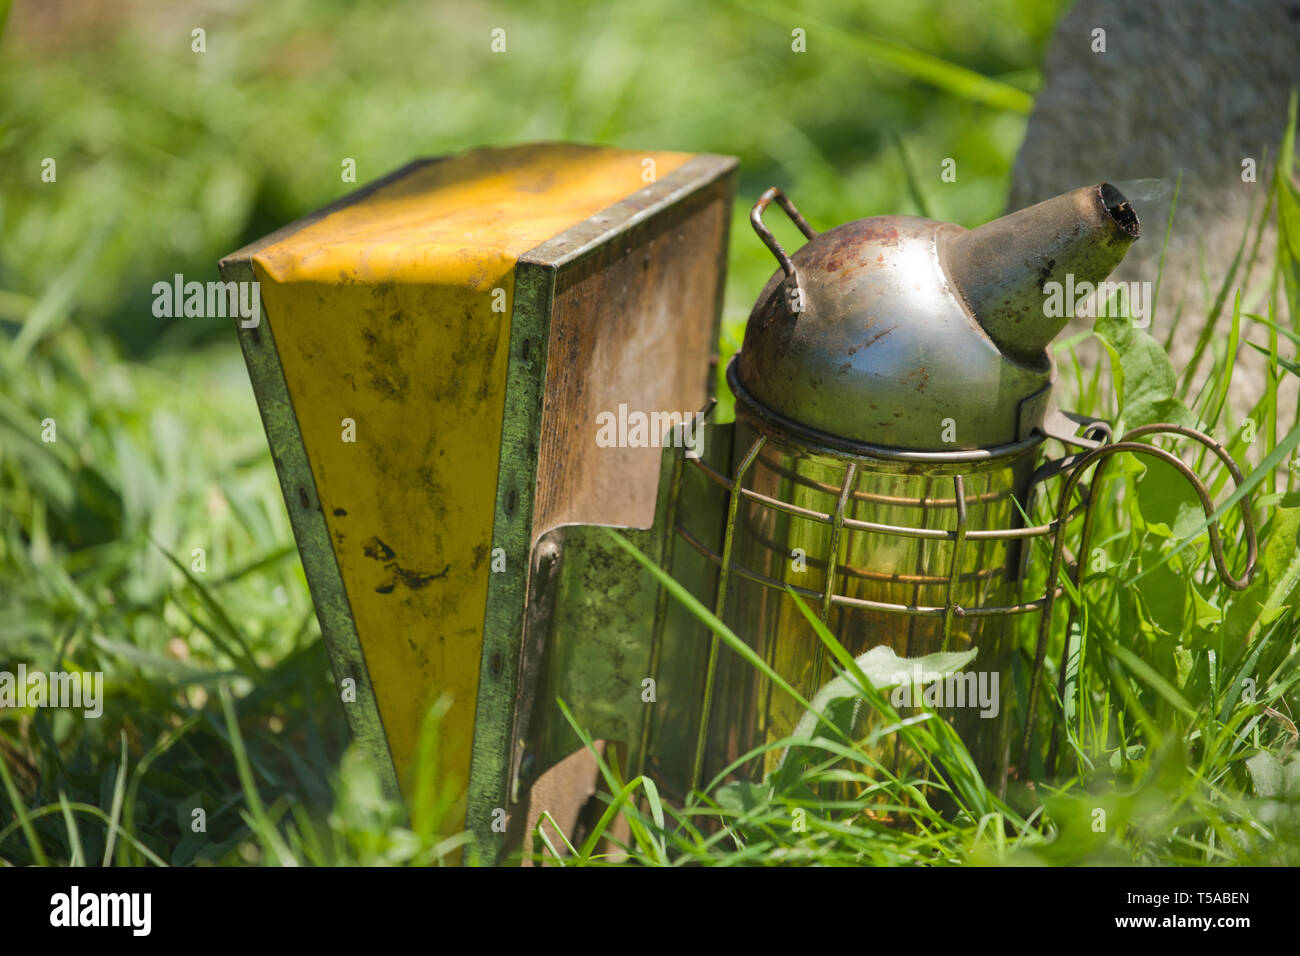 Bee smoker resting on the grass, puffing smoke, ready to be used to distract bees in a hive.  The smoker is a metal, spouted container with a bellows. Stock Photo